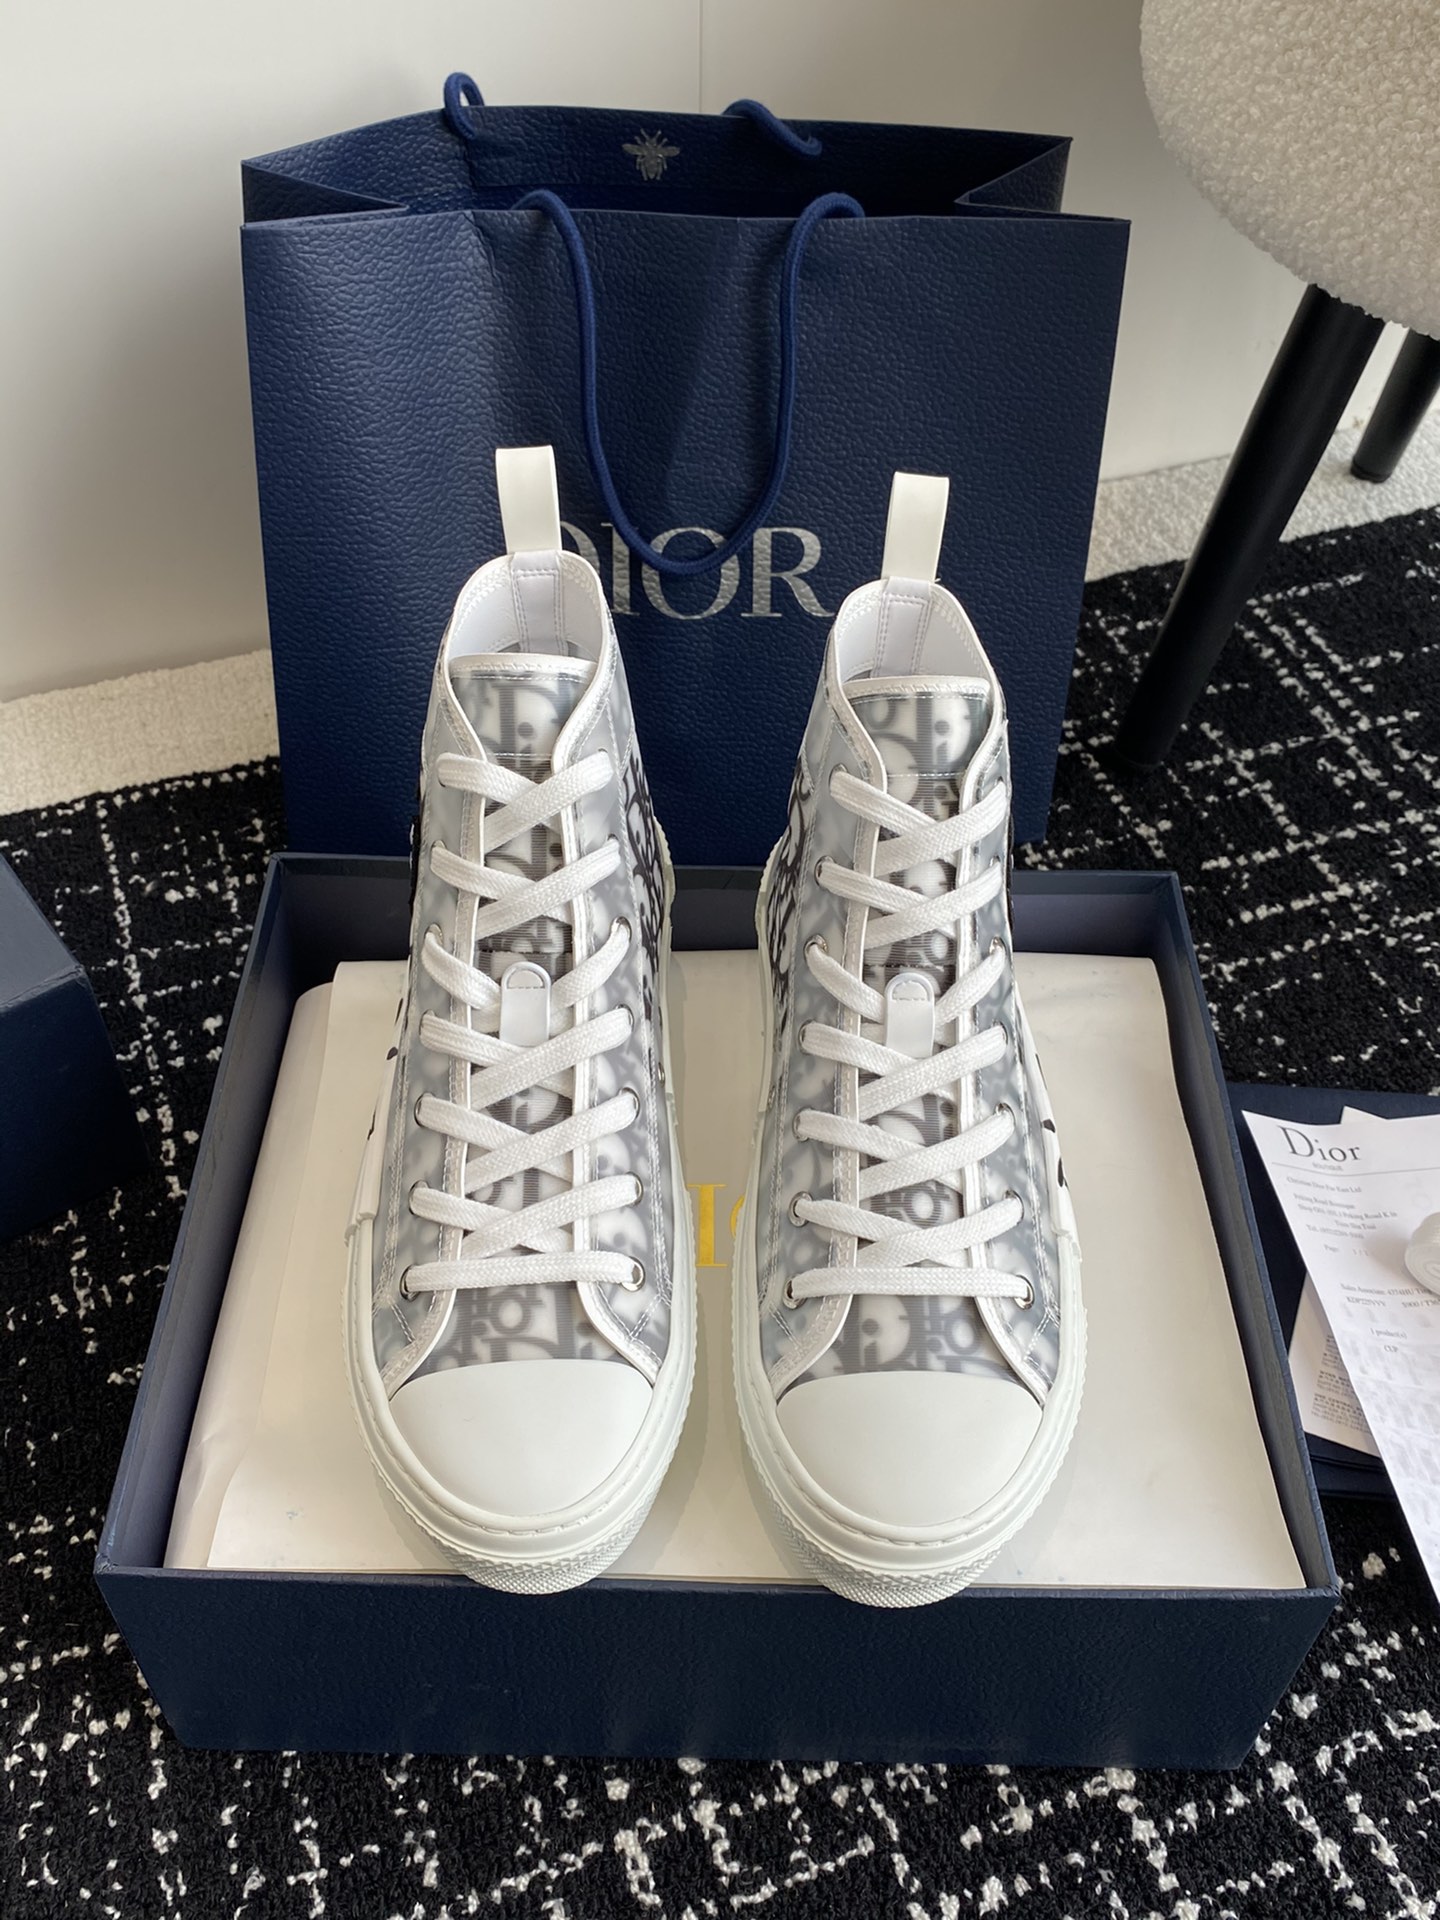 Dior Skateboard Shoes Sneakers Printing Unisex Women Men Canvas TPU Oblique High Tops